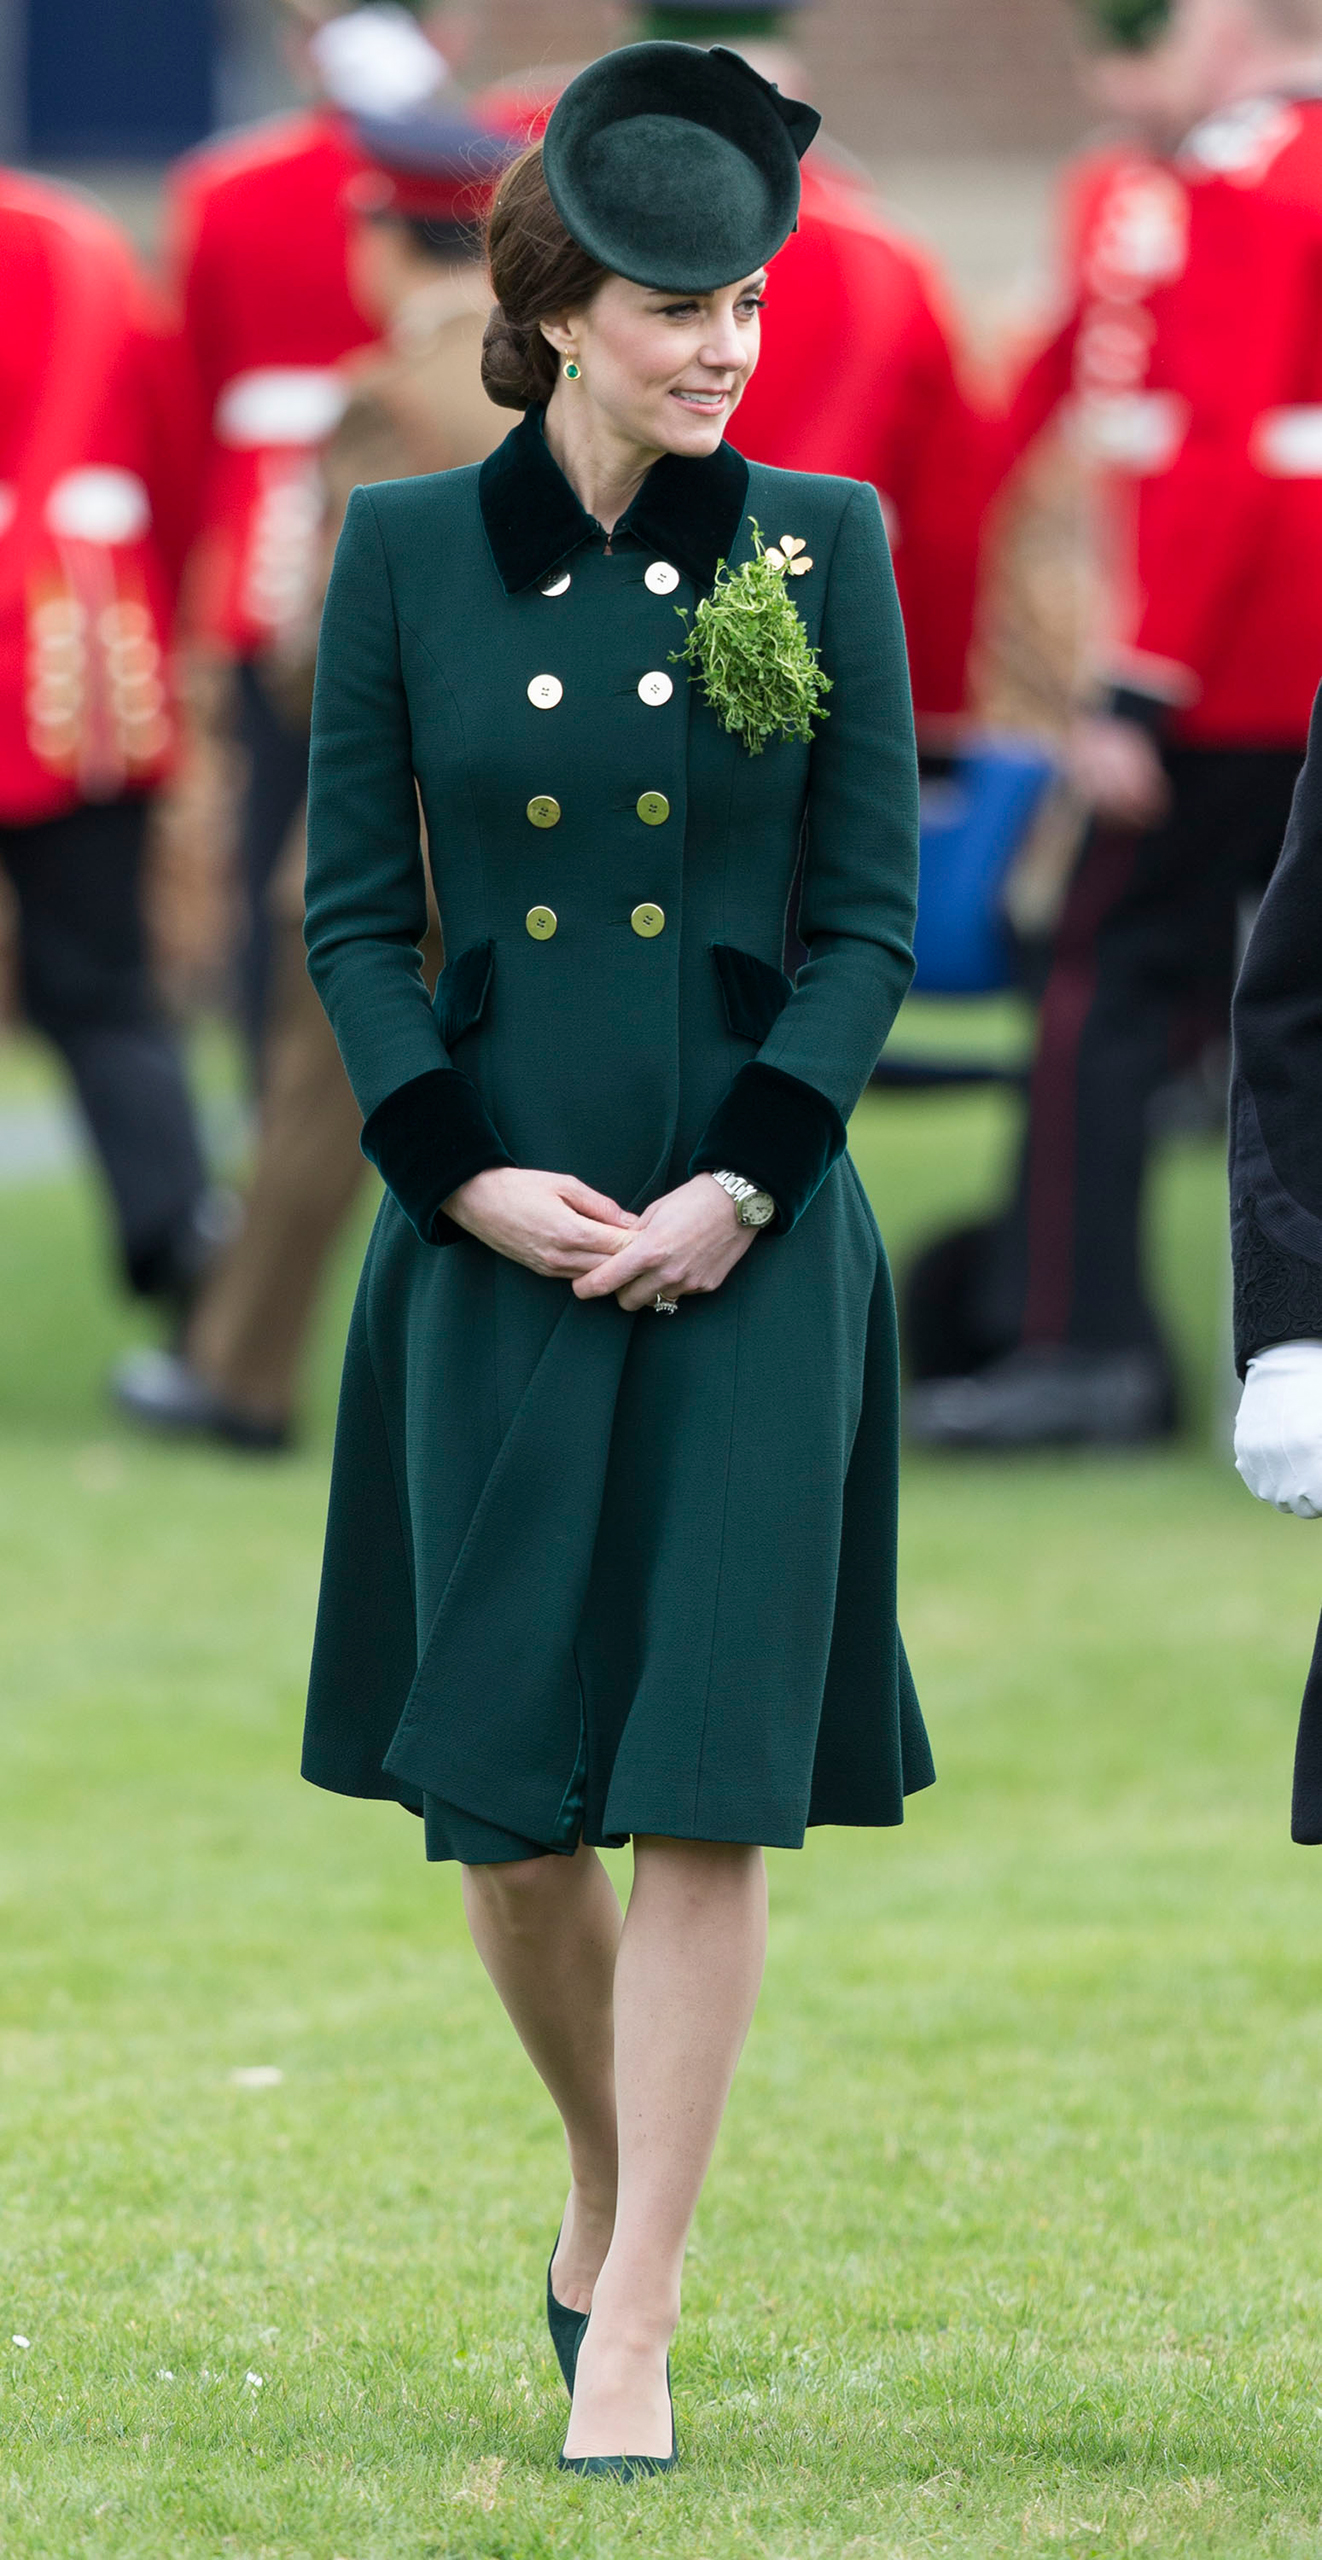 Catherine, Duchess of Cambridge, attends the annual Irish Guards St Patrick's Day Parade at Household Cavalry Barracks in London on March 17, 2017. (UK Press Pool/Getty Images)